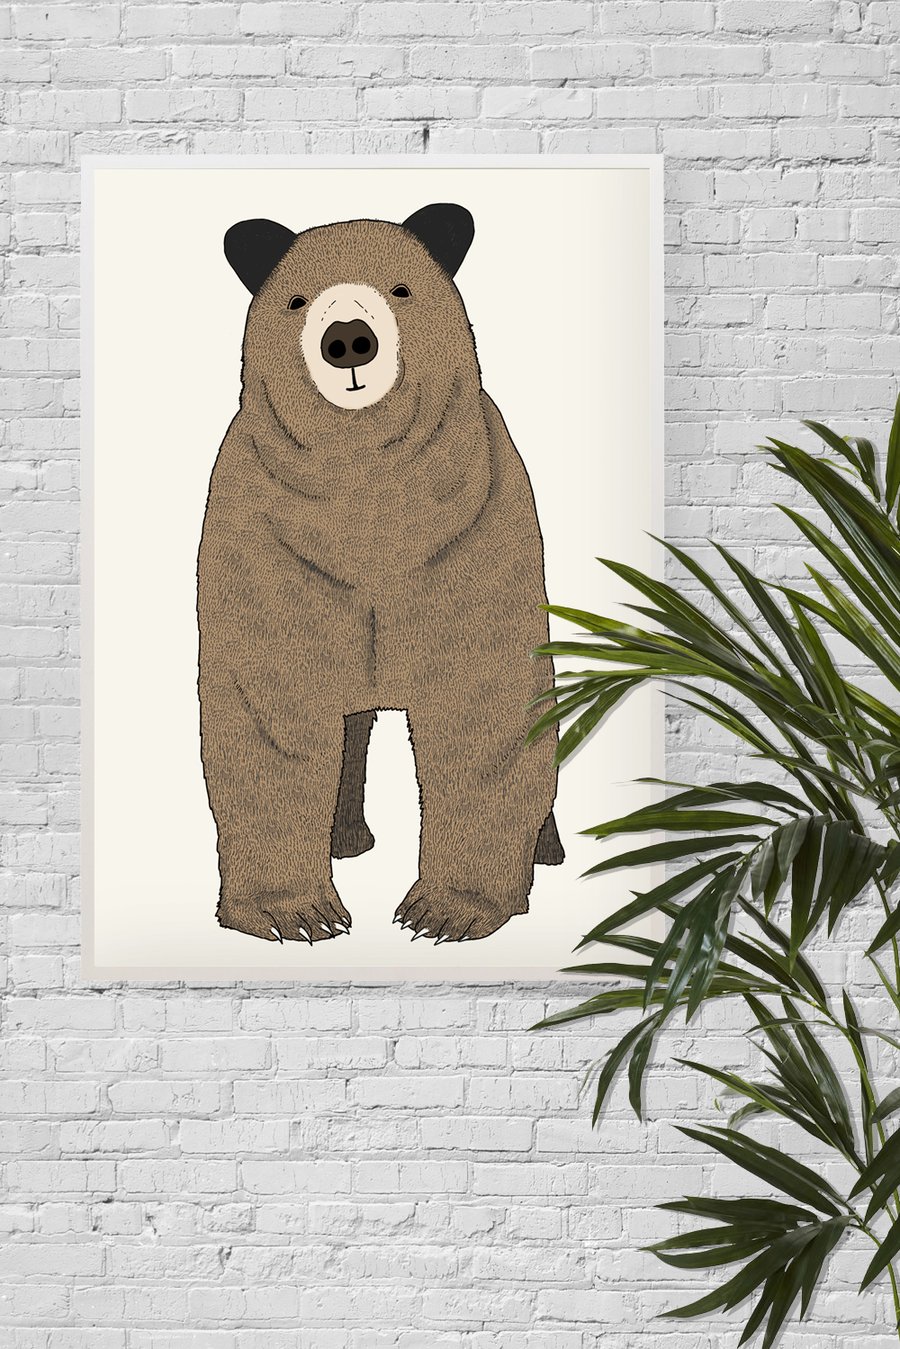 Toby, A3 Giclee Print featuring cute brown bear